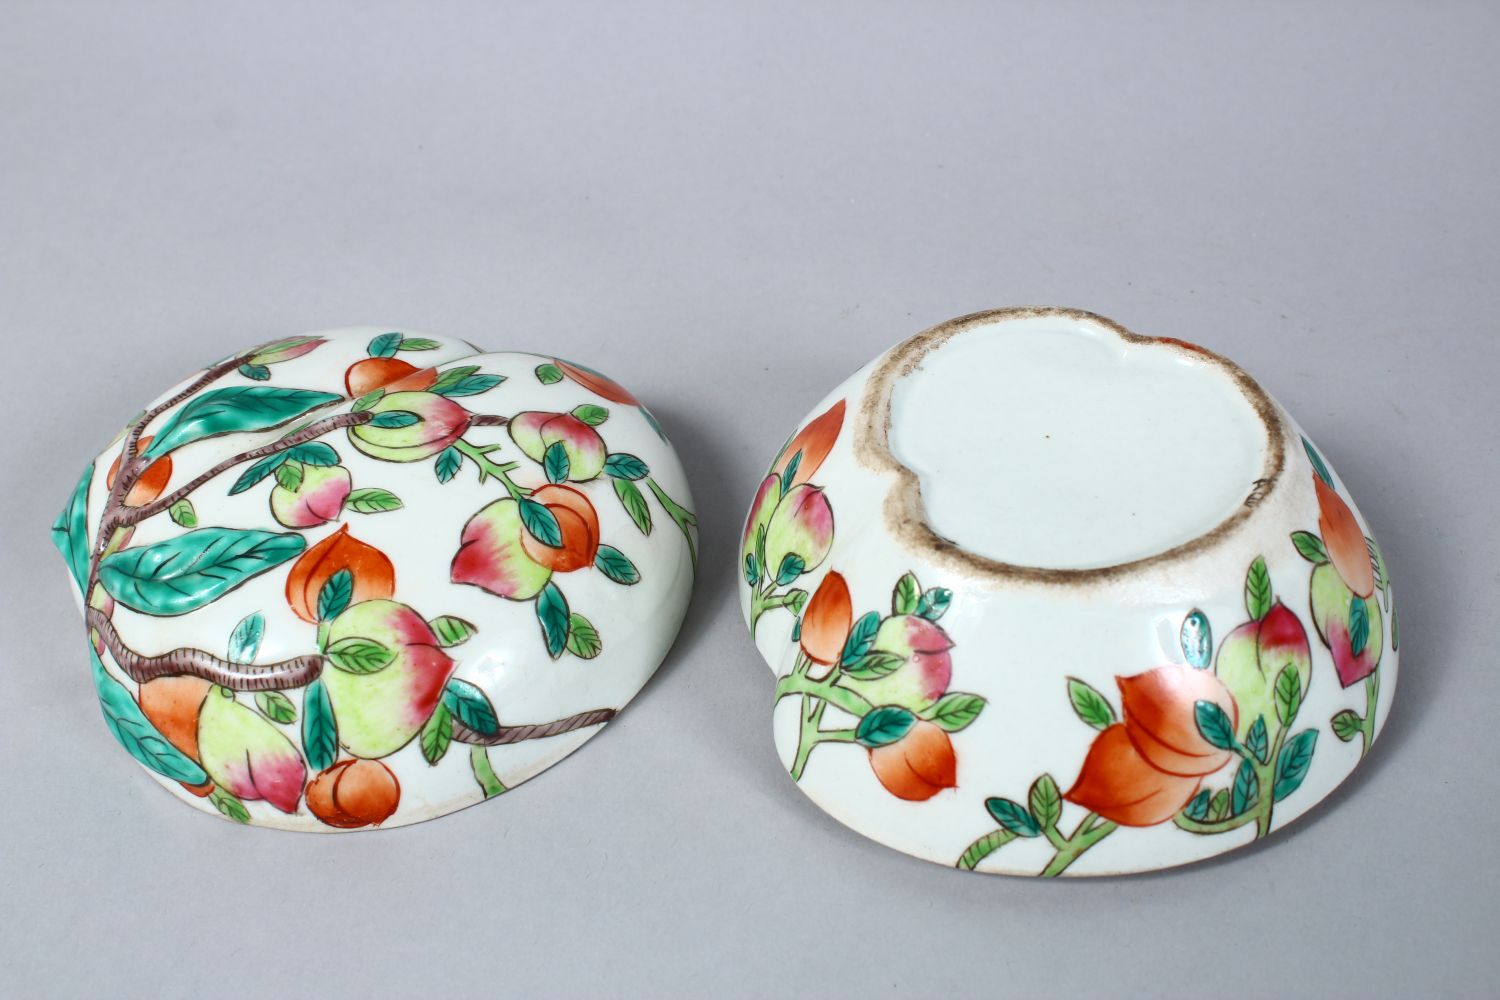 A GOOD 19TH CENTURY QIANLONG STYLE FAMILLE ROSE PORCELAIN PEACH BOX & COVER, in the form of a peach, - Image 5 of 5